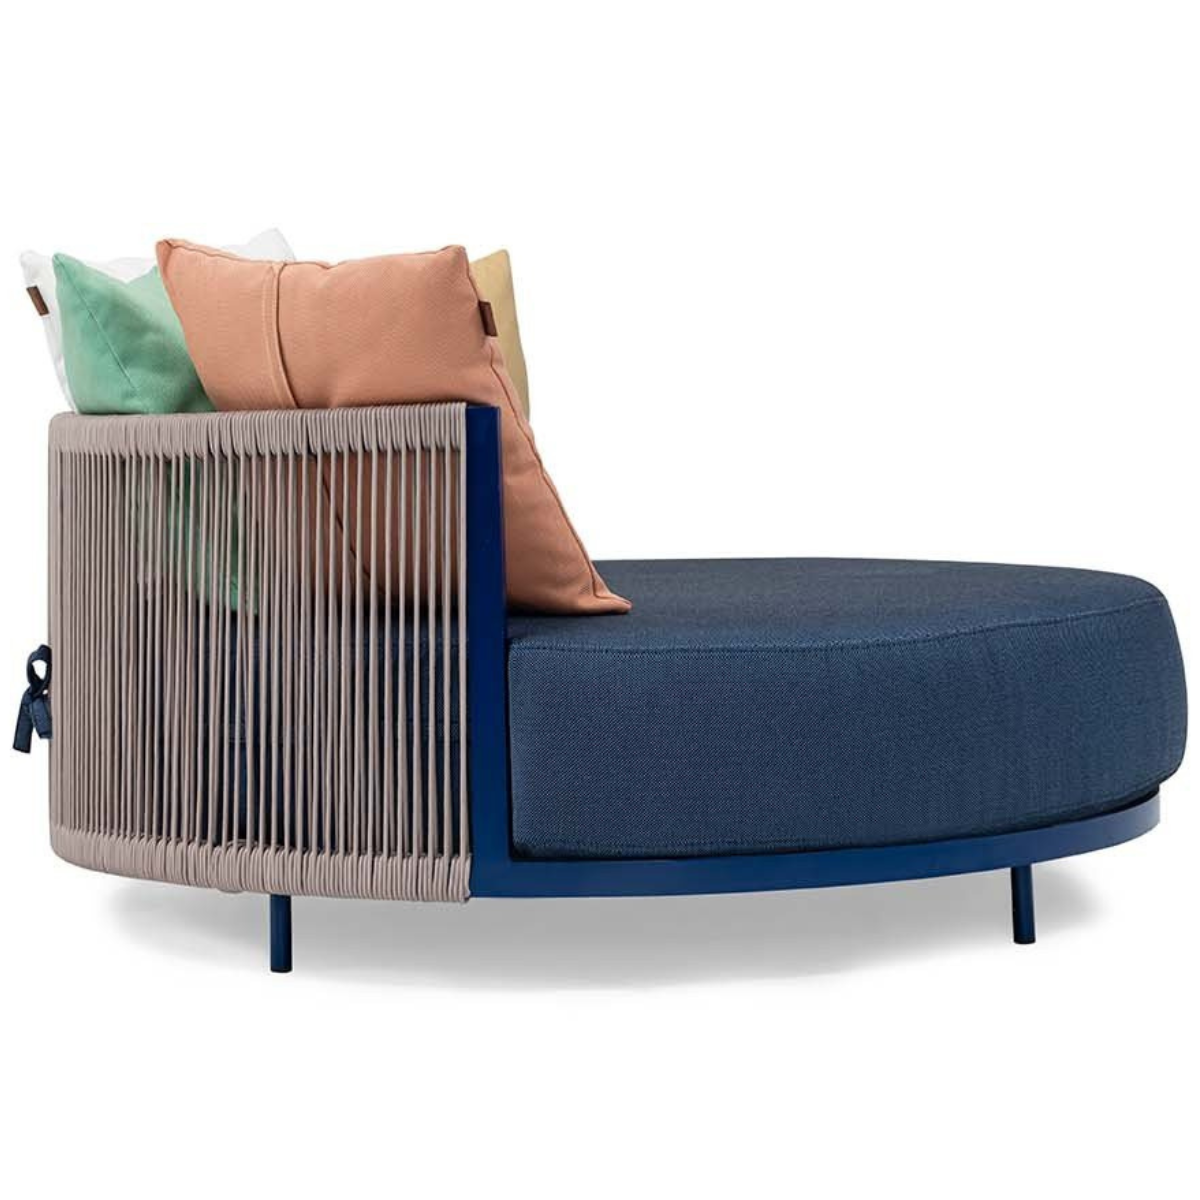 Lovebed Lounge Chair